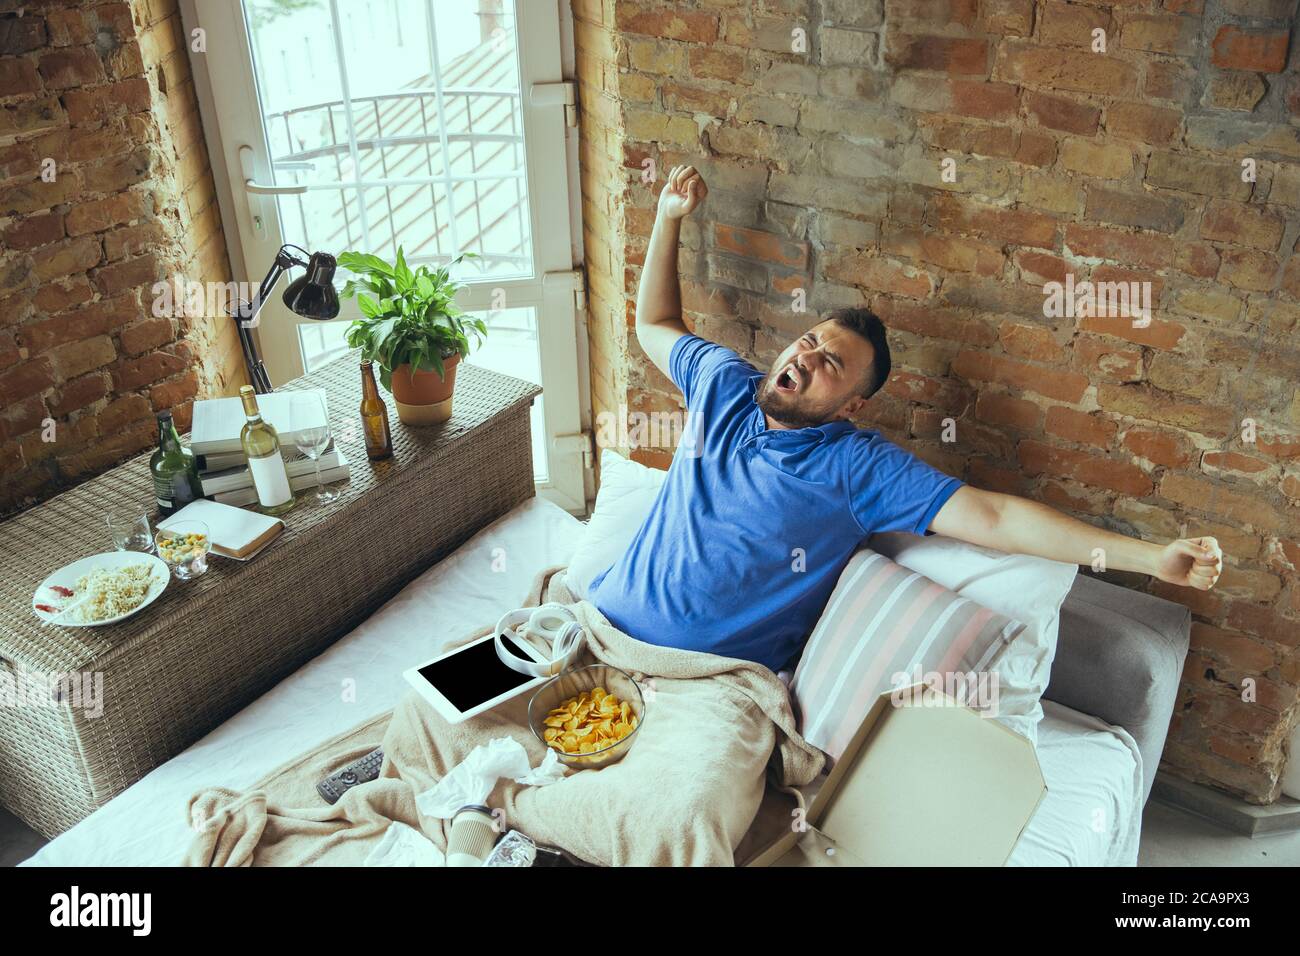 Yawns, stretches, feels full of happiness. Lazy man living in his bed surrounded with messy. No need to go out to be happy. Using gadgets, watching movie and series, emotional. Fast food. Stock Photo